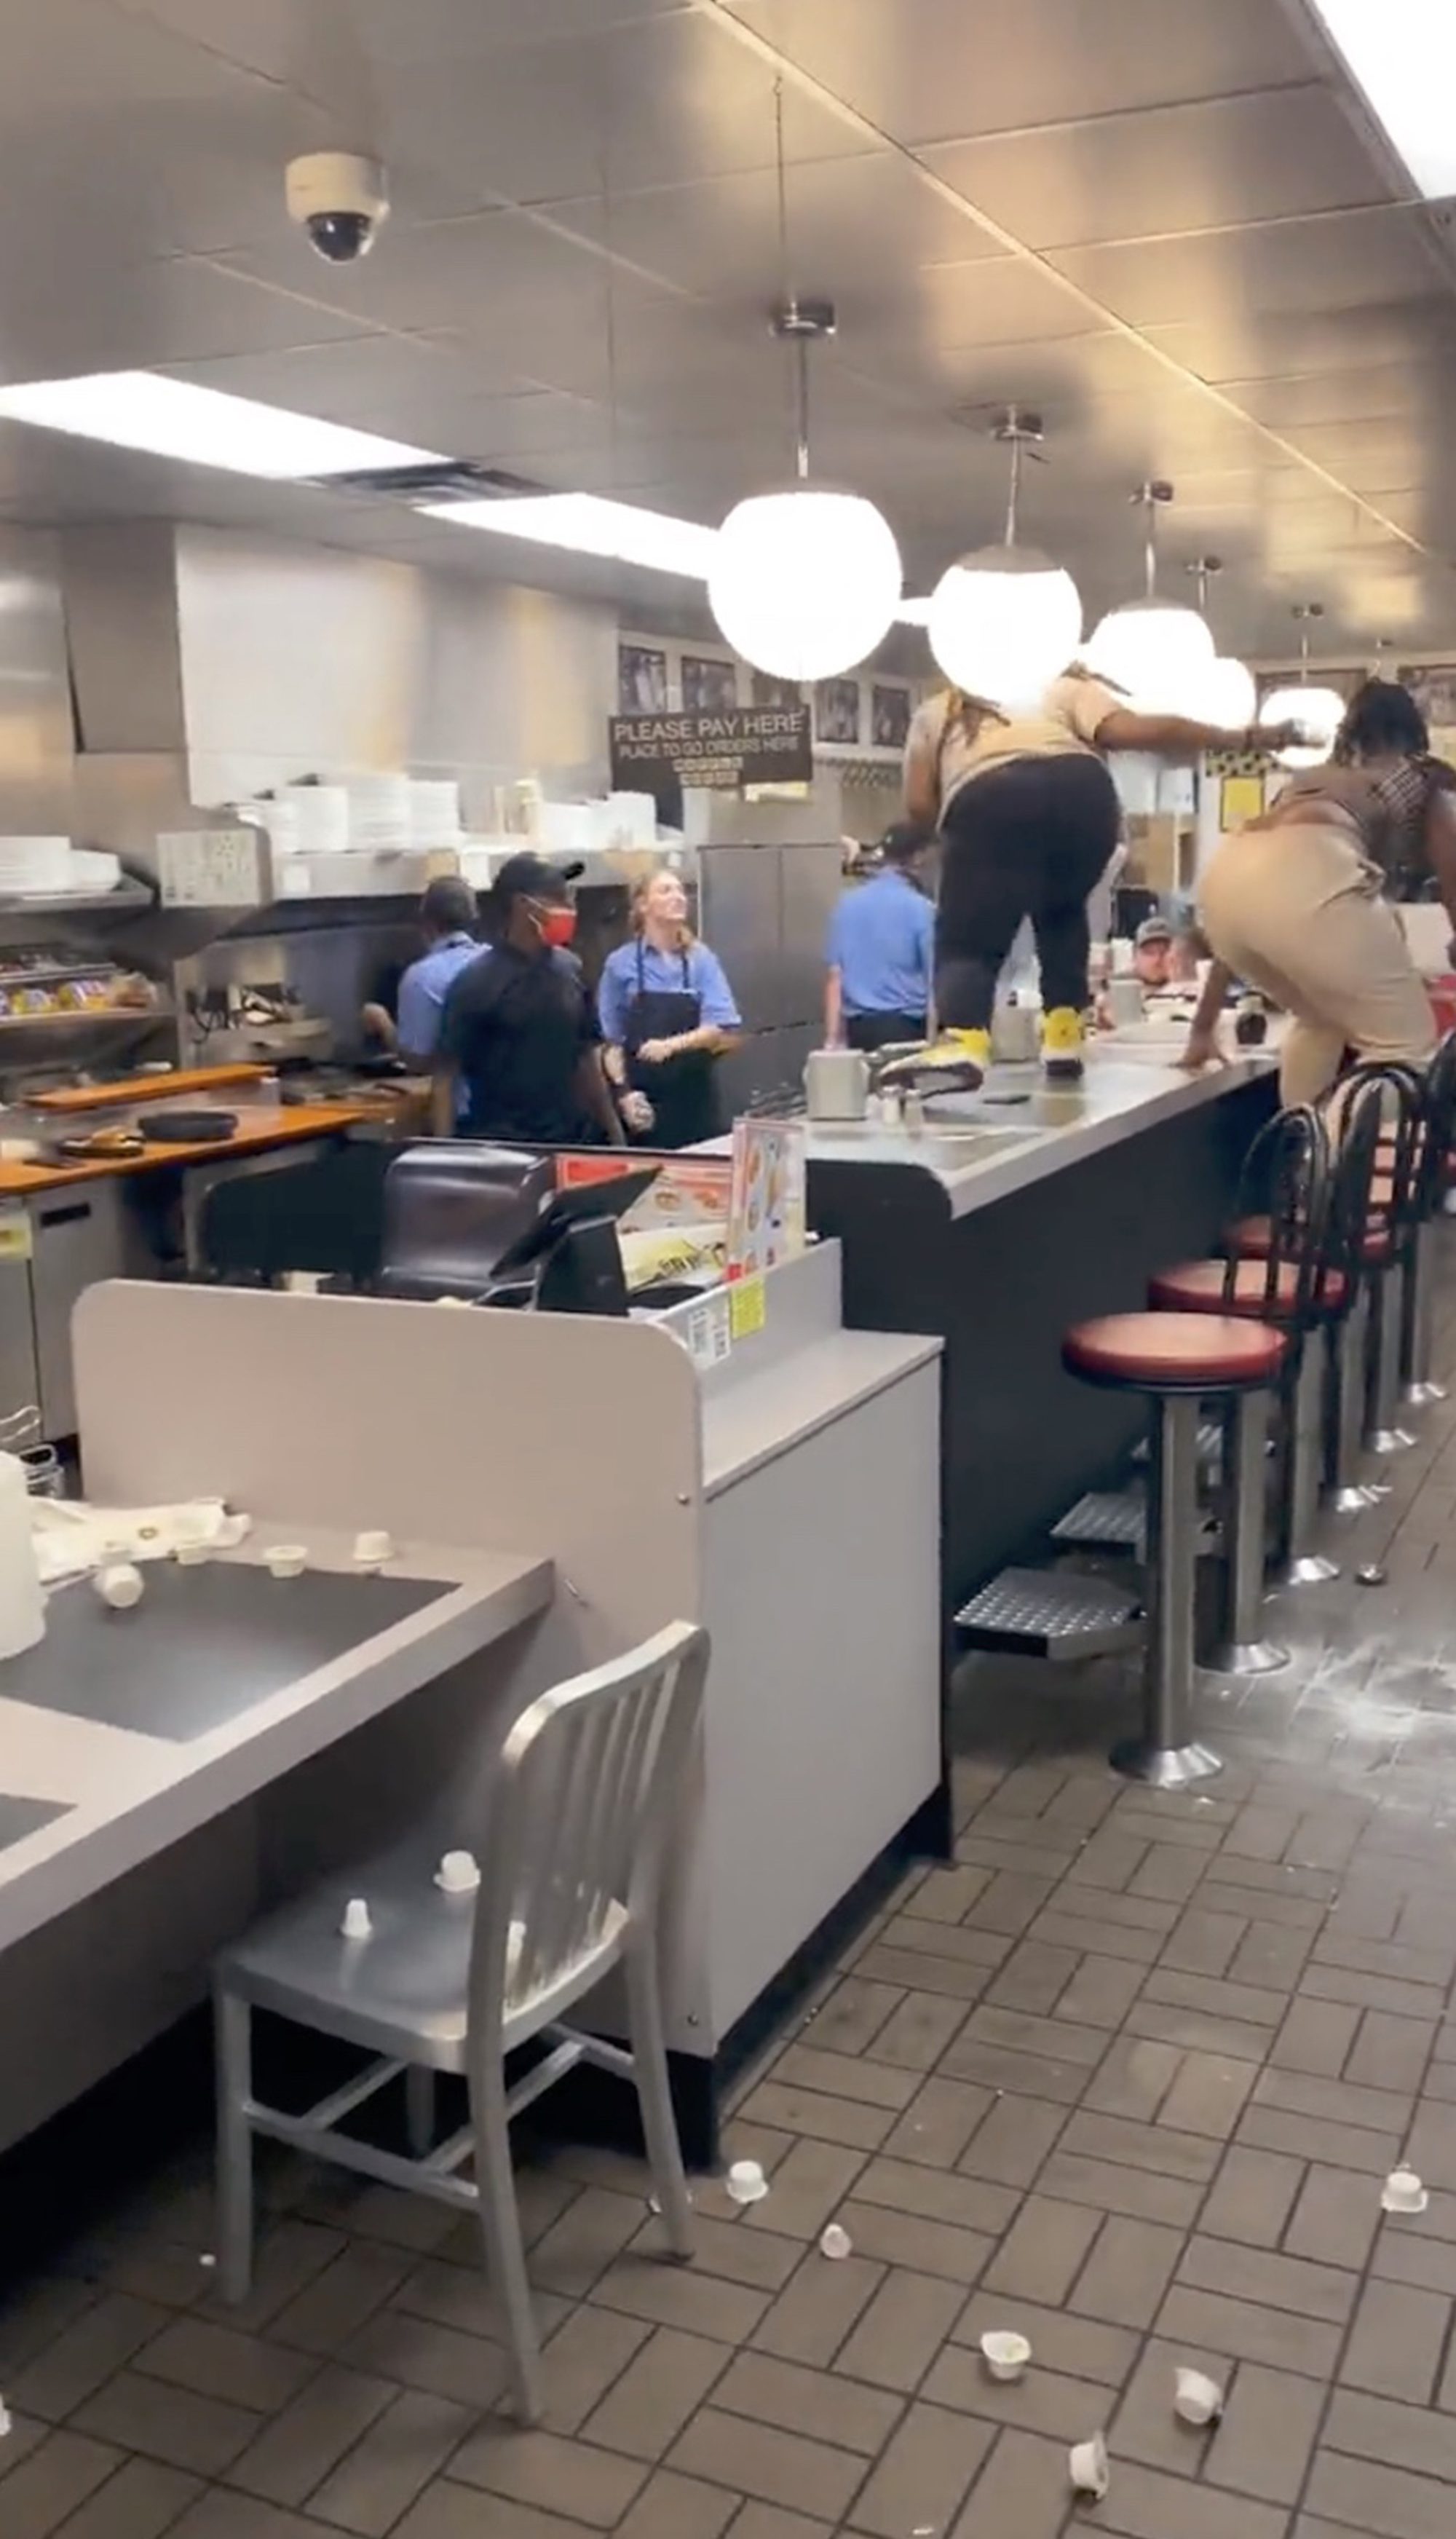 The viral clip shows several hungry patrons attacking employees after allegedly becoming upset by slow service. 